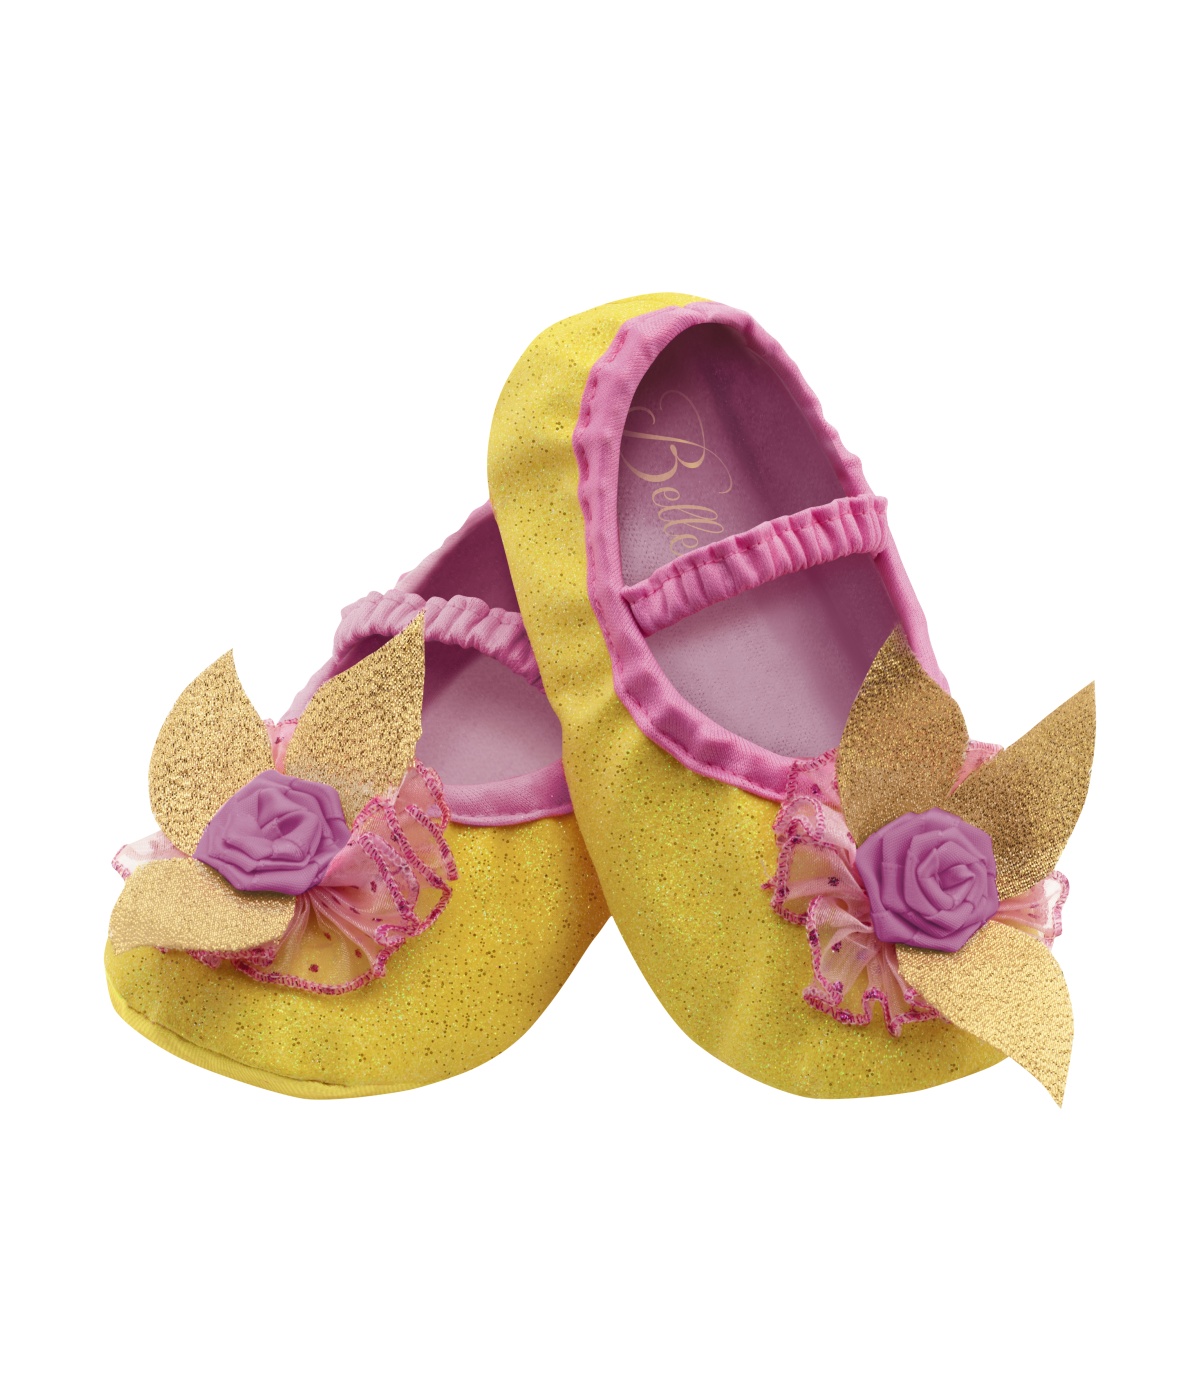 belle princess shoes for toddlers